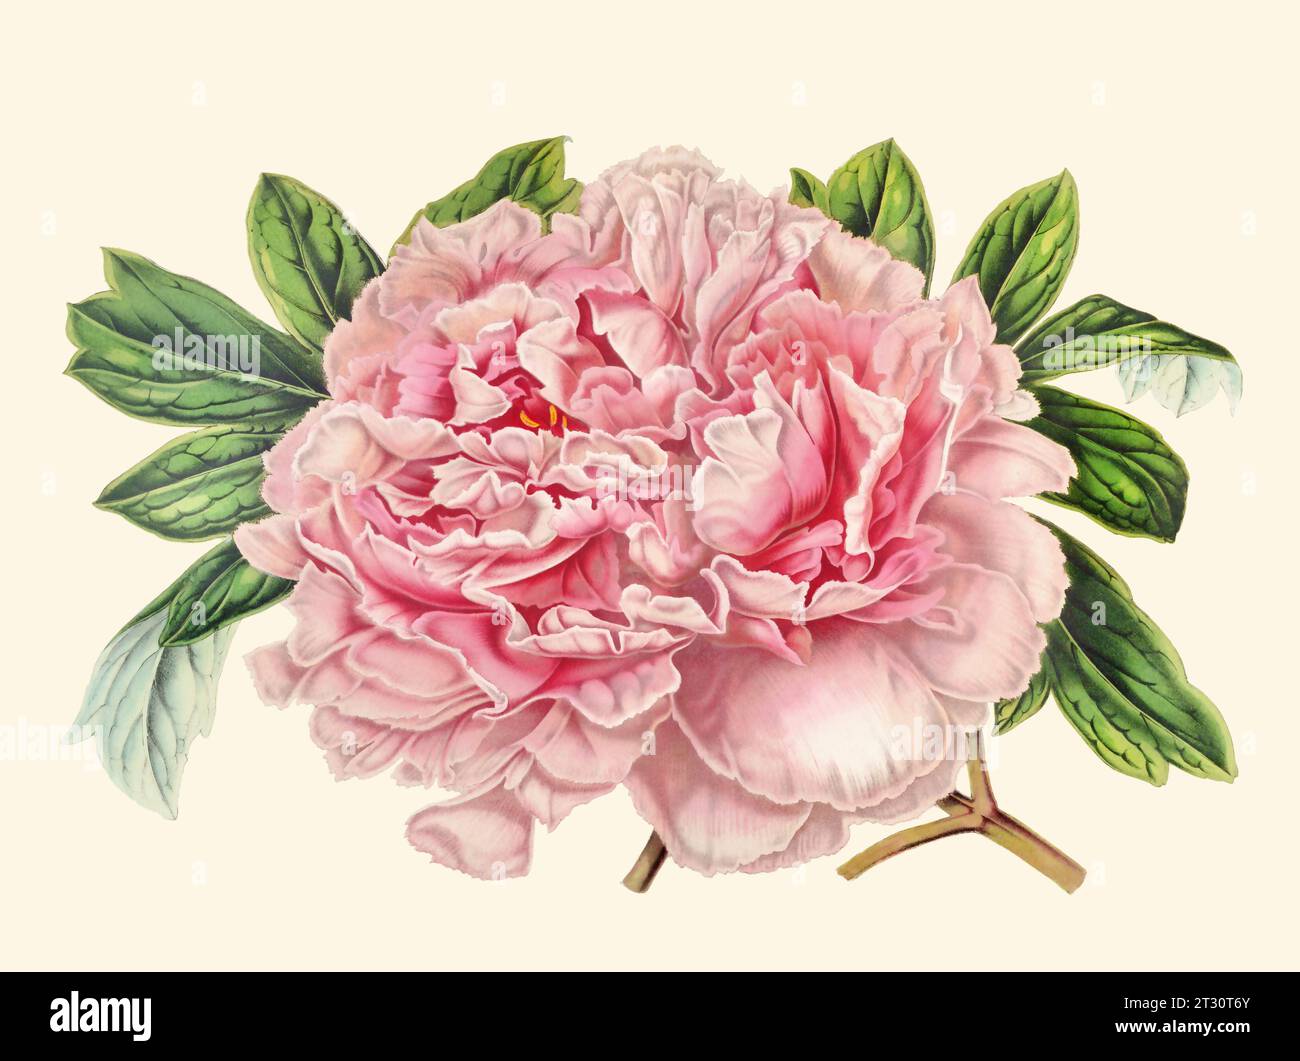 Colorful Peony Flower Illustration: A digital vintage-style flower on a plain beige background. Stock Photo